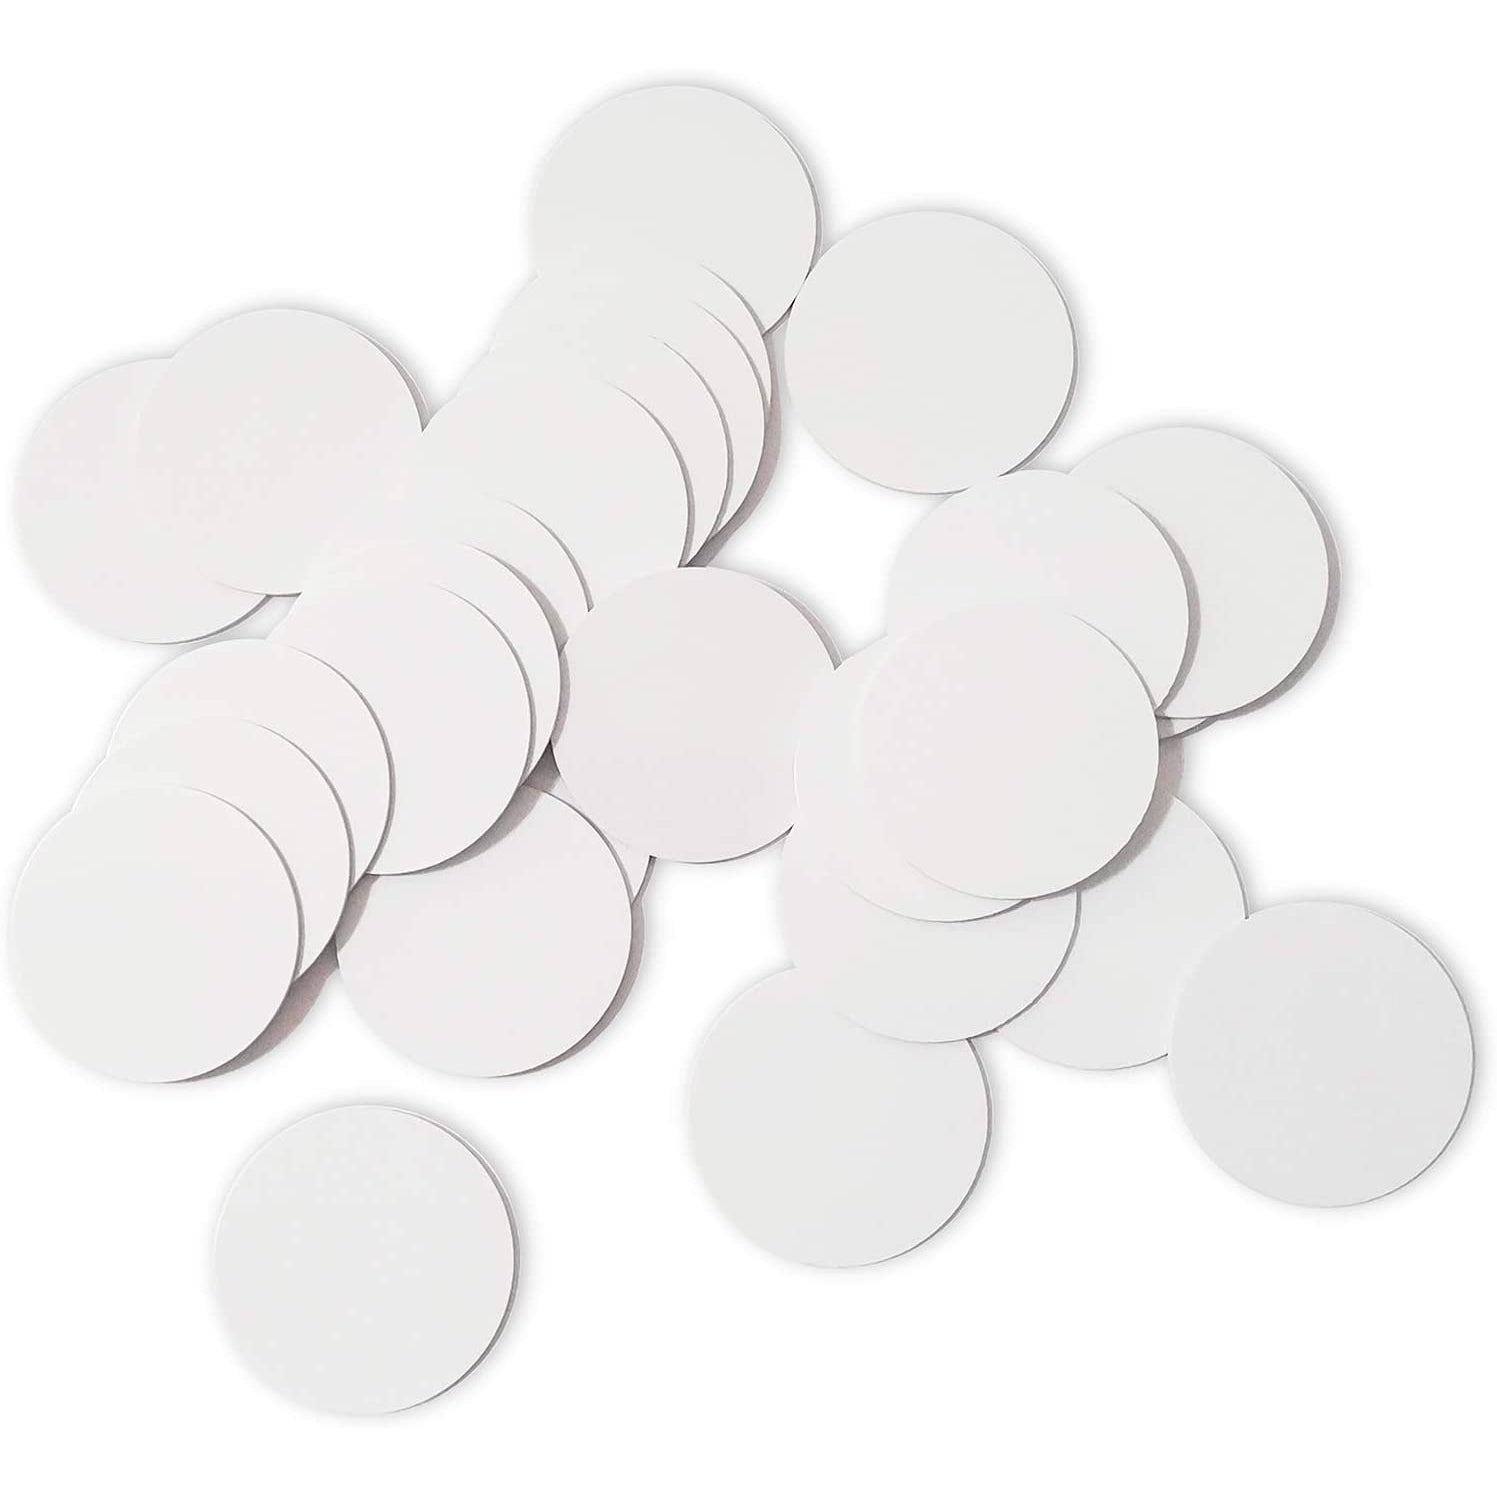 Gialer NTAG215 NFC Tags Round 25mm(1 inch) Blank White NTAG215 NFC Cards Compatible TagMo Amiibo and All NFC Enabled Mobile Phones & Devices